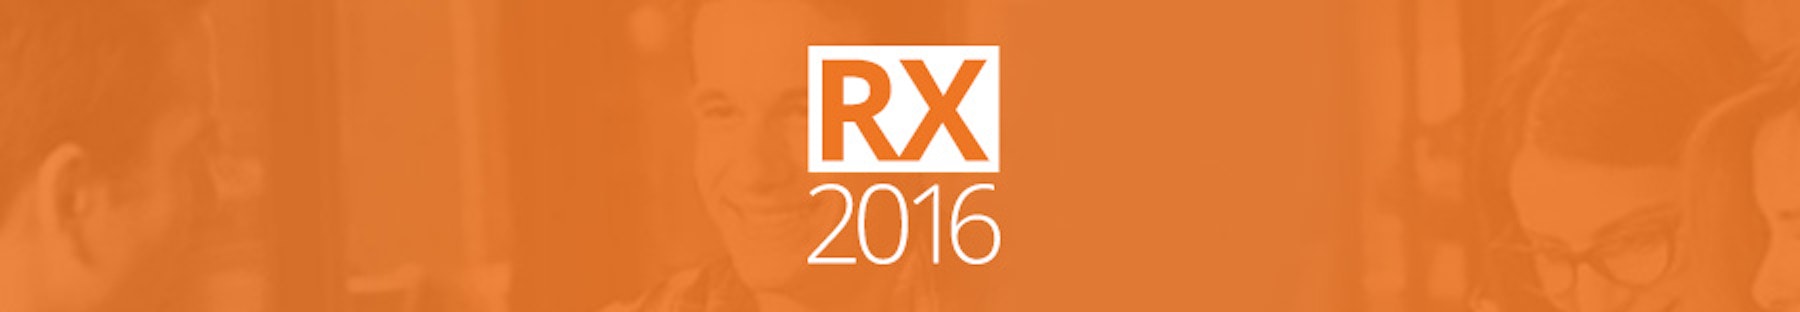 RX2016: A Second Chance to See It All